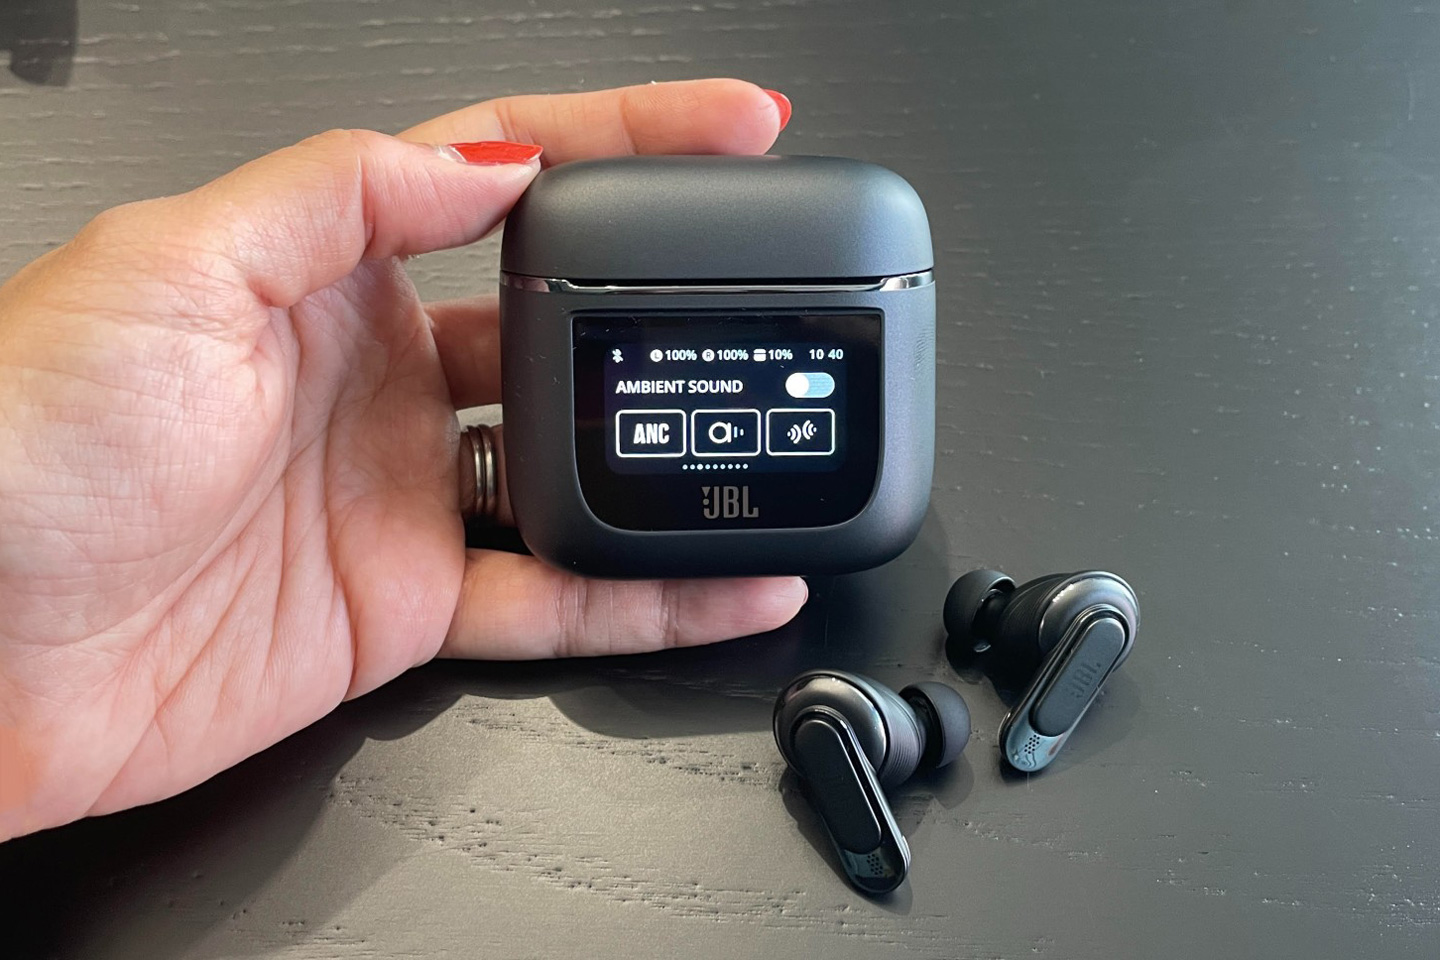 #JBL unveils the Tour PRO 2 TWS Earbuds with an actual touchscreen display on the charging case